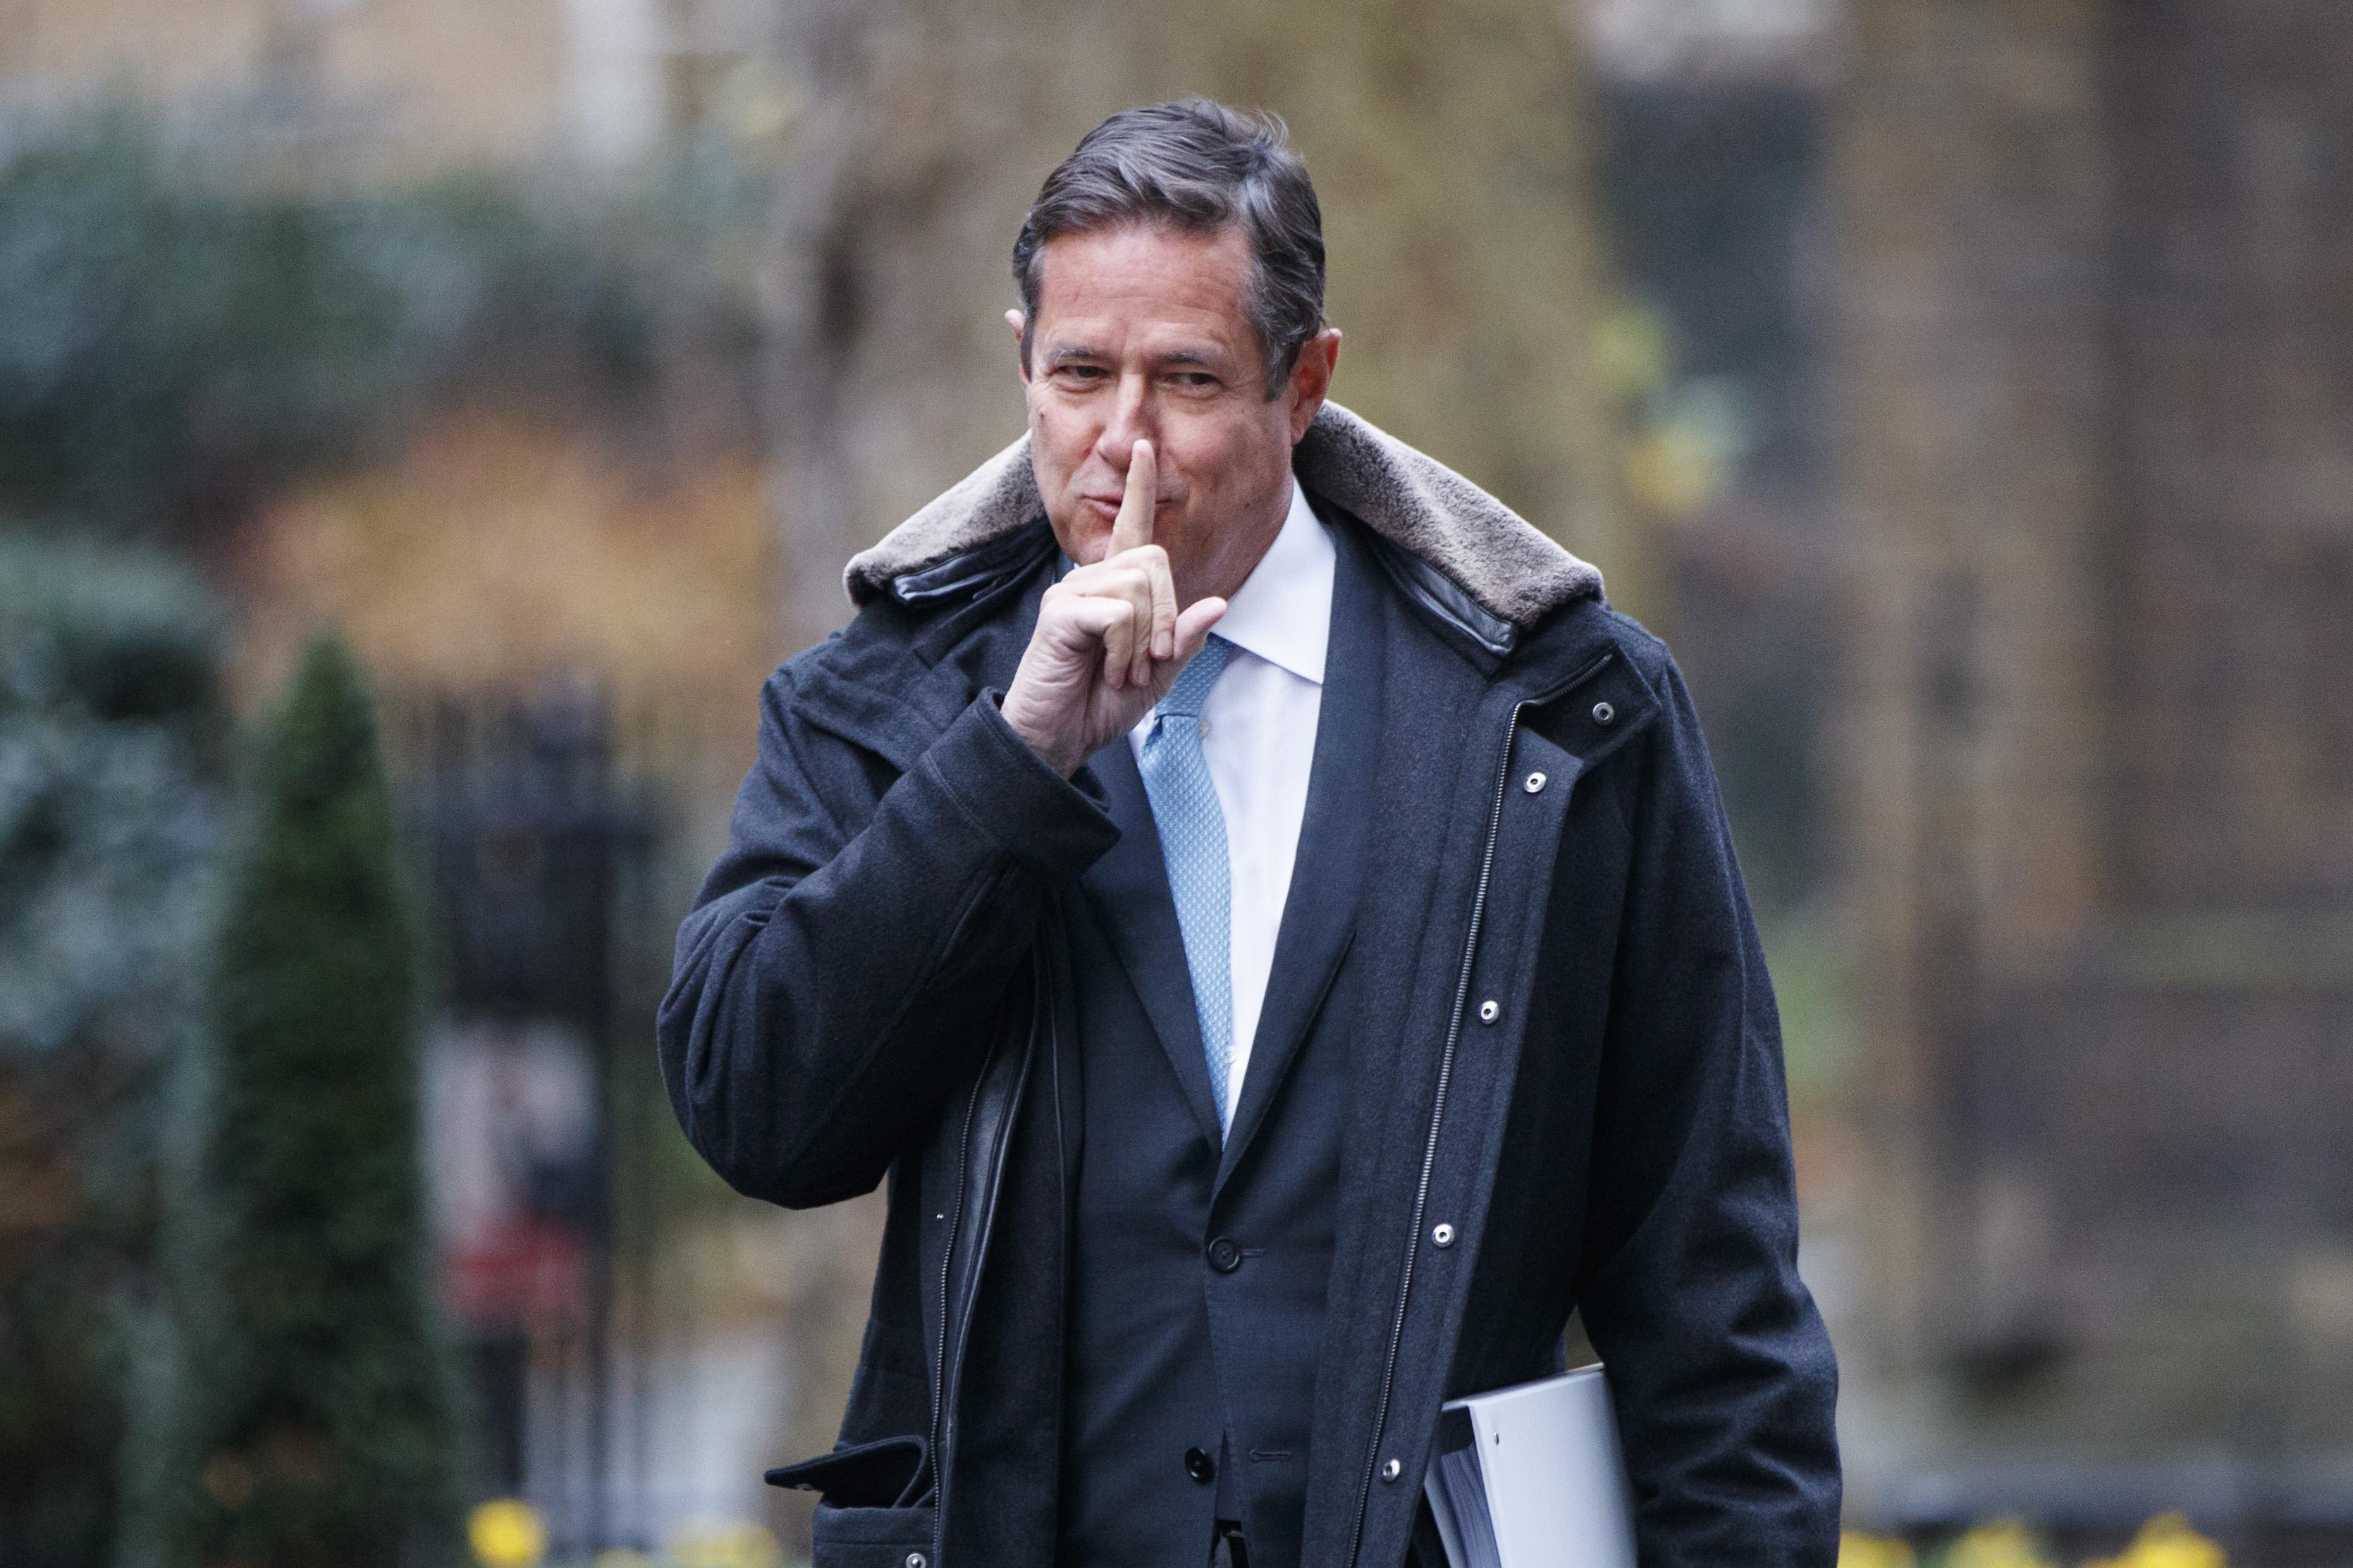 Jes Staley, CEO Barclays, arrives at Downing Street for a meeting in London on January 11, 2018.
Britain's Prime Minister Theresa May mets with business leaders from the financial services sector at Downing Street.  / AFP PHOTO / Tolga Akmen        (Photo credit should read TOLGA AKMEN/AFP/Getty Images)